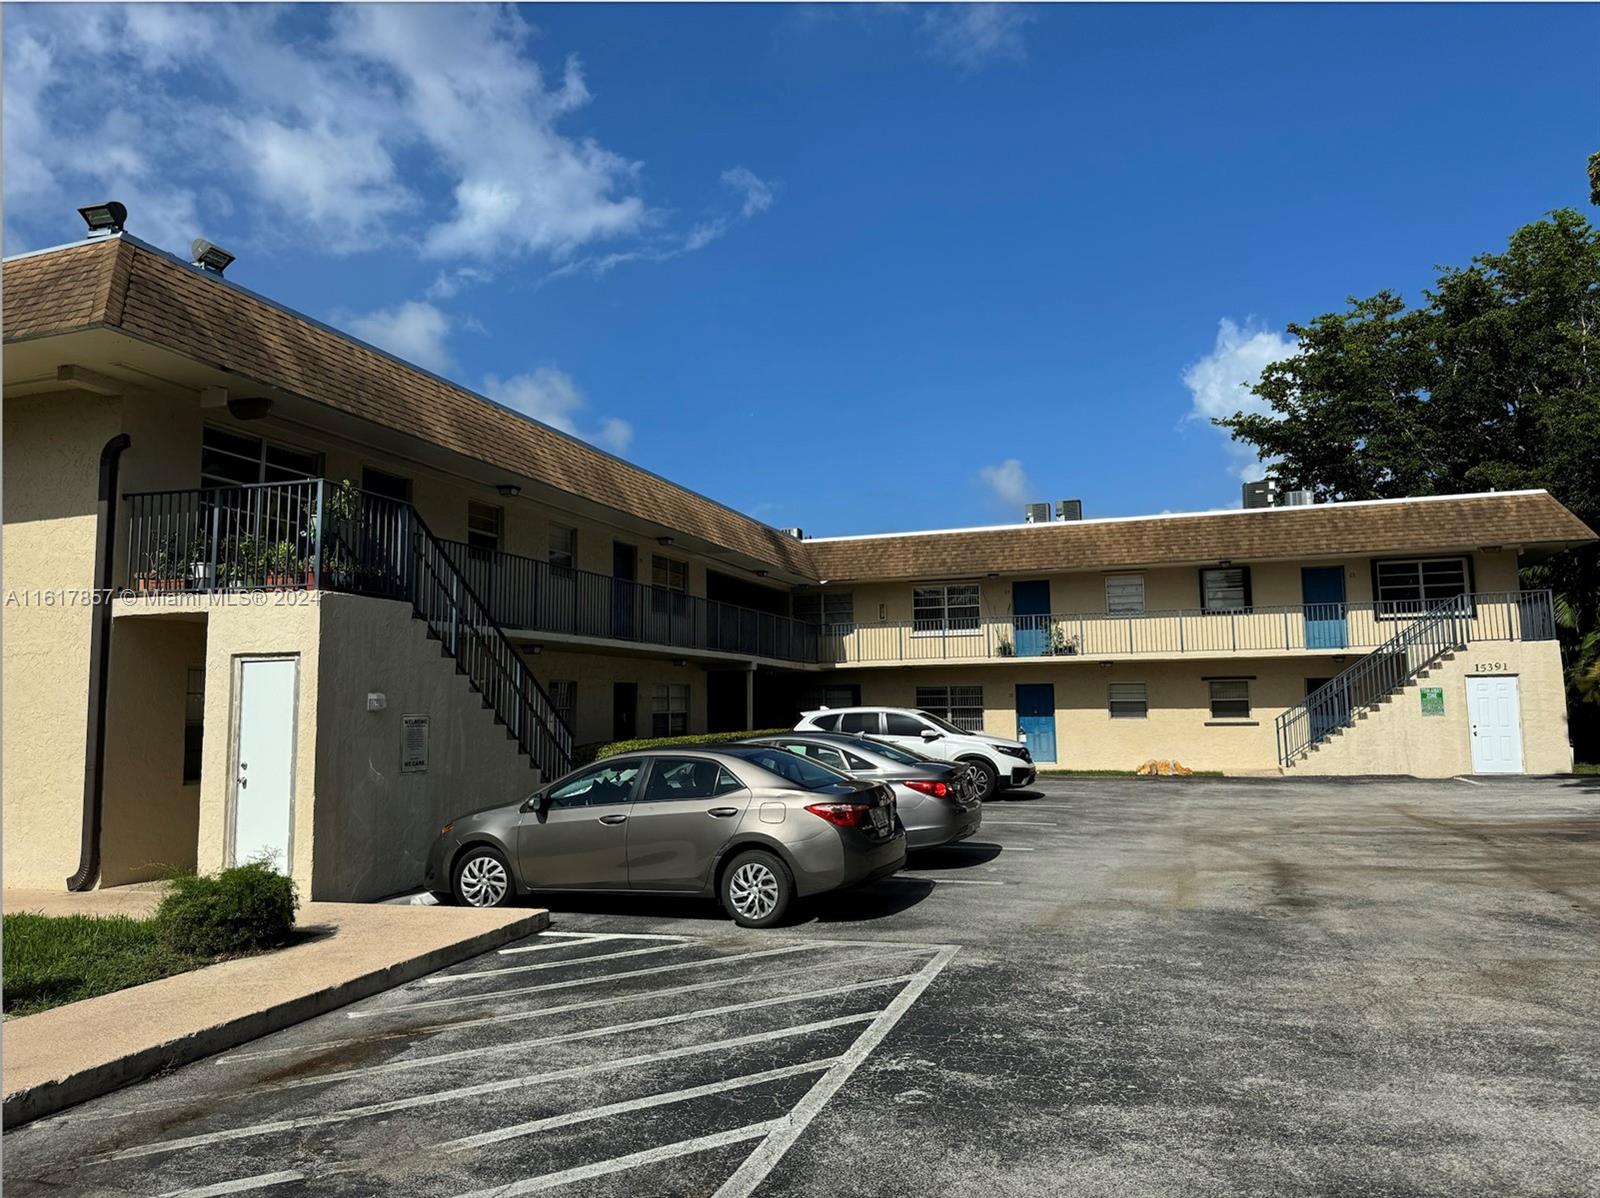 This is a wonderful, small, private community tusked away out of sight. Located in an excellent school district and very close to major public transportation options. This community offers a quite, peaceful place that is perfect for a family or someone looking for a quiet little nook hidden in the city of Miami.